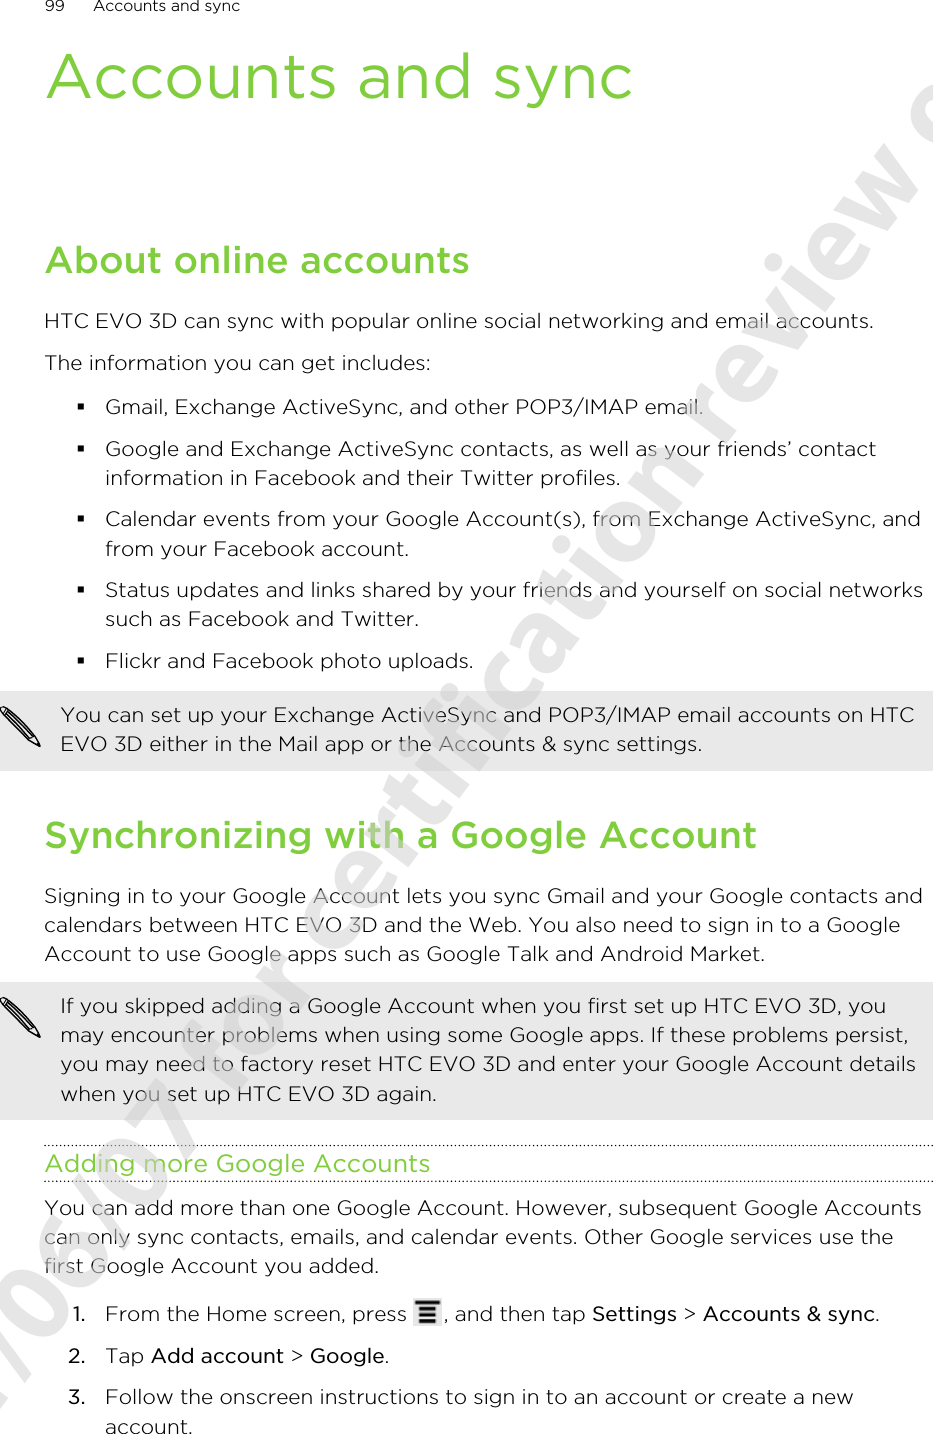 Accounts and syncAbout online accountsHTC EVO 3D can sync with popular online social networking and email accounts.The information you can get includes:§Gmail, Exchange ActiveSync, and other POP3/IMAP email.§Google and Exchange ActiveSync contacts, as well as your friends’ contactinformation in Facebook and their Twitter profiles.§Calendar events from your Google Account(s), from Exchange ActiveSync, andfrom your Facebook account.§Status updates and links shared by your friends and yourself on social networkssuch as Facebook and Twitter.§Flickr and Facebook photo uploads.You can set up your Exchange ActiveSync and POP3/IMAP email accounts on HTCEVO 3D either in the Mail app or the Accounts &amp; sync settings.Synchronizing with a Google AccountSigning in to your Google Account lets you sync Gmail and your Google contacts andcalendars between HTC EVO 3D and the Web. You also need to sign in to a GoogleAccount to use Google apps such as Google Talk and Android Market.If you skipped adding a Google Account when you first set up HTC EVO 3D, youmay encounter problems when using some Google apps. If these problems persist,you may need to factory reset HTC EVO 3D and enter your Google Account detailswhen you set up HTC EVO 3D again.Adding more Google AccountsYou can add more than one Google Account. However, subsequent Google Accountscan only sync contacts, emails, and calendar events. Other Google services use thefirst Google Account you added.1. From the Home screen, press  , and then tap Settings &gt; Accounts &amp; sync.2. Tap Add account &gt; Google.3. Follow the onscreen instructions to sign in to an account or create a newaccount.99 Accounts and sync2011/06/07 for certification review only